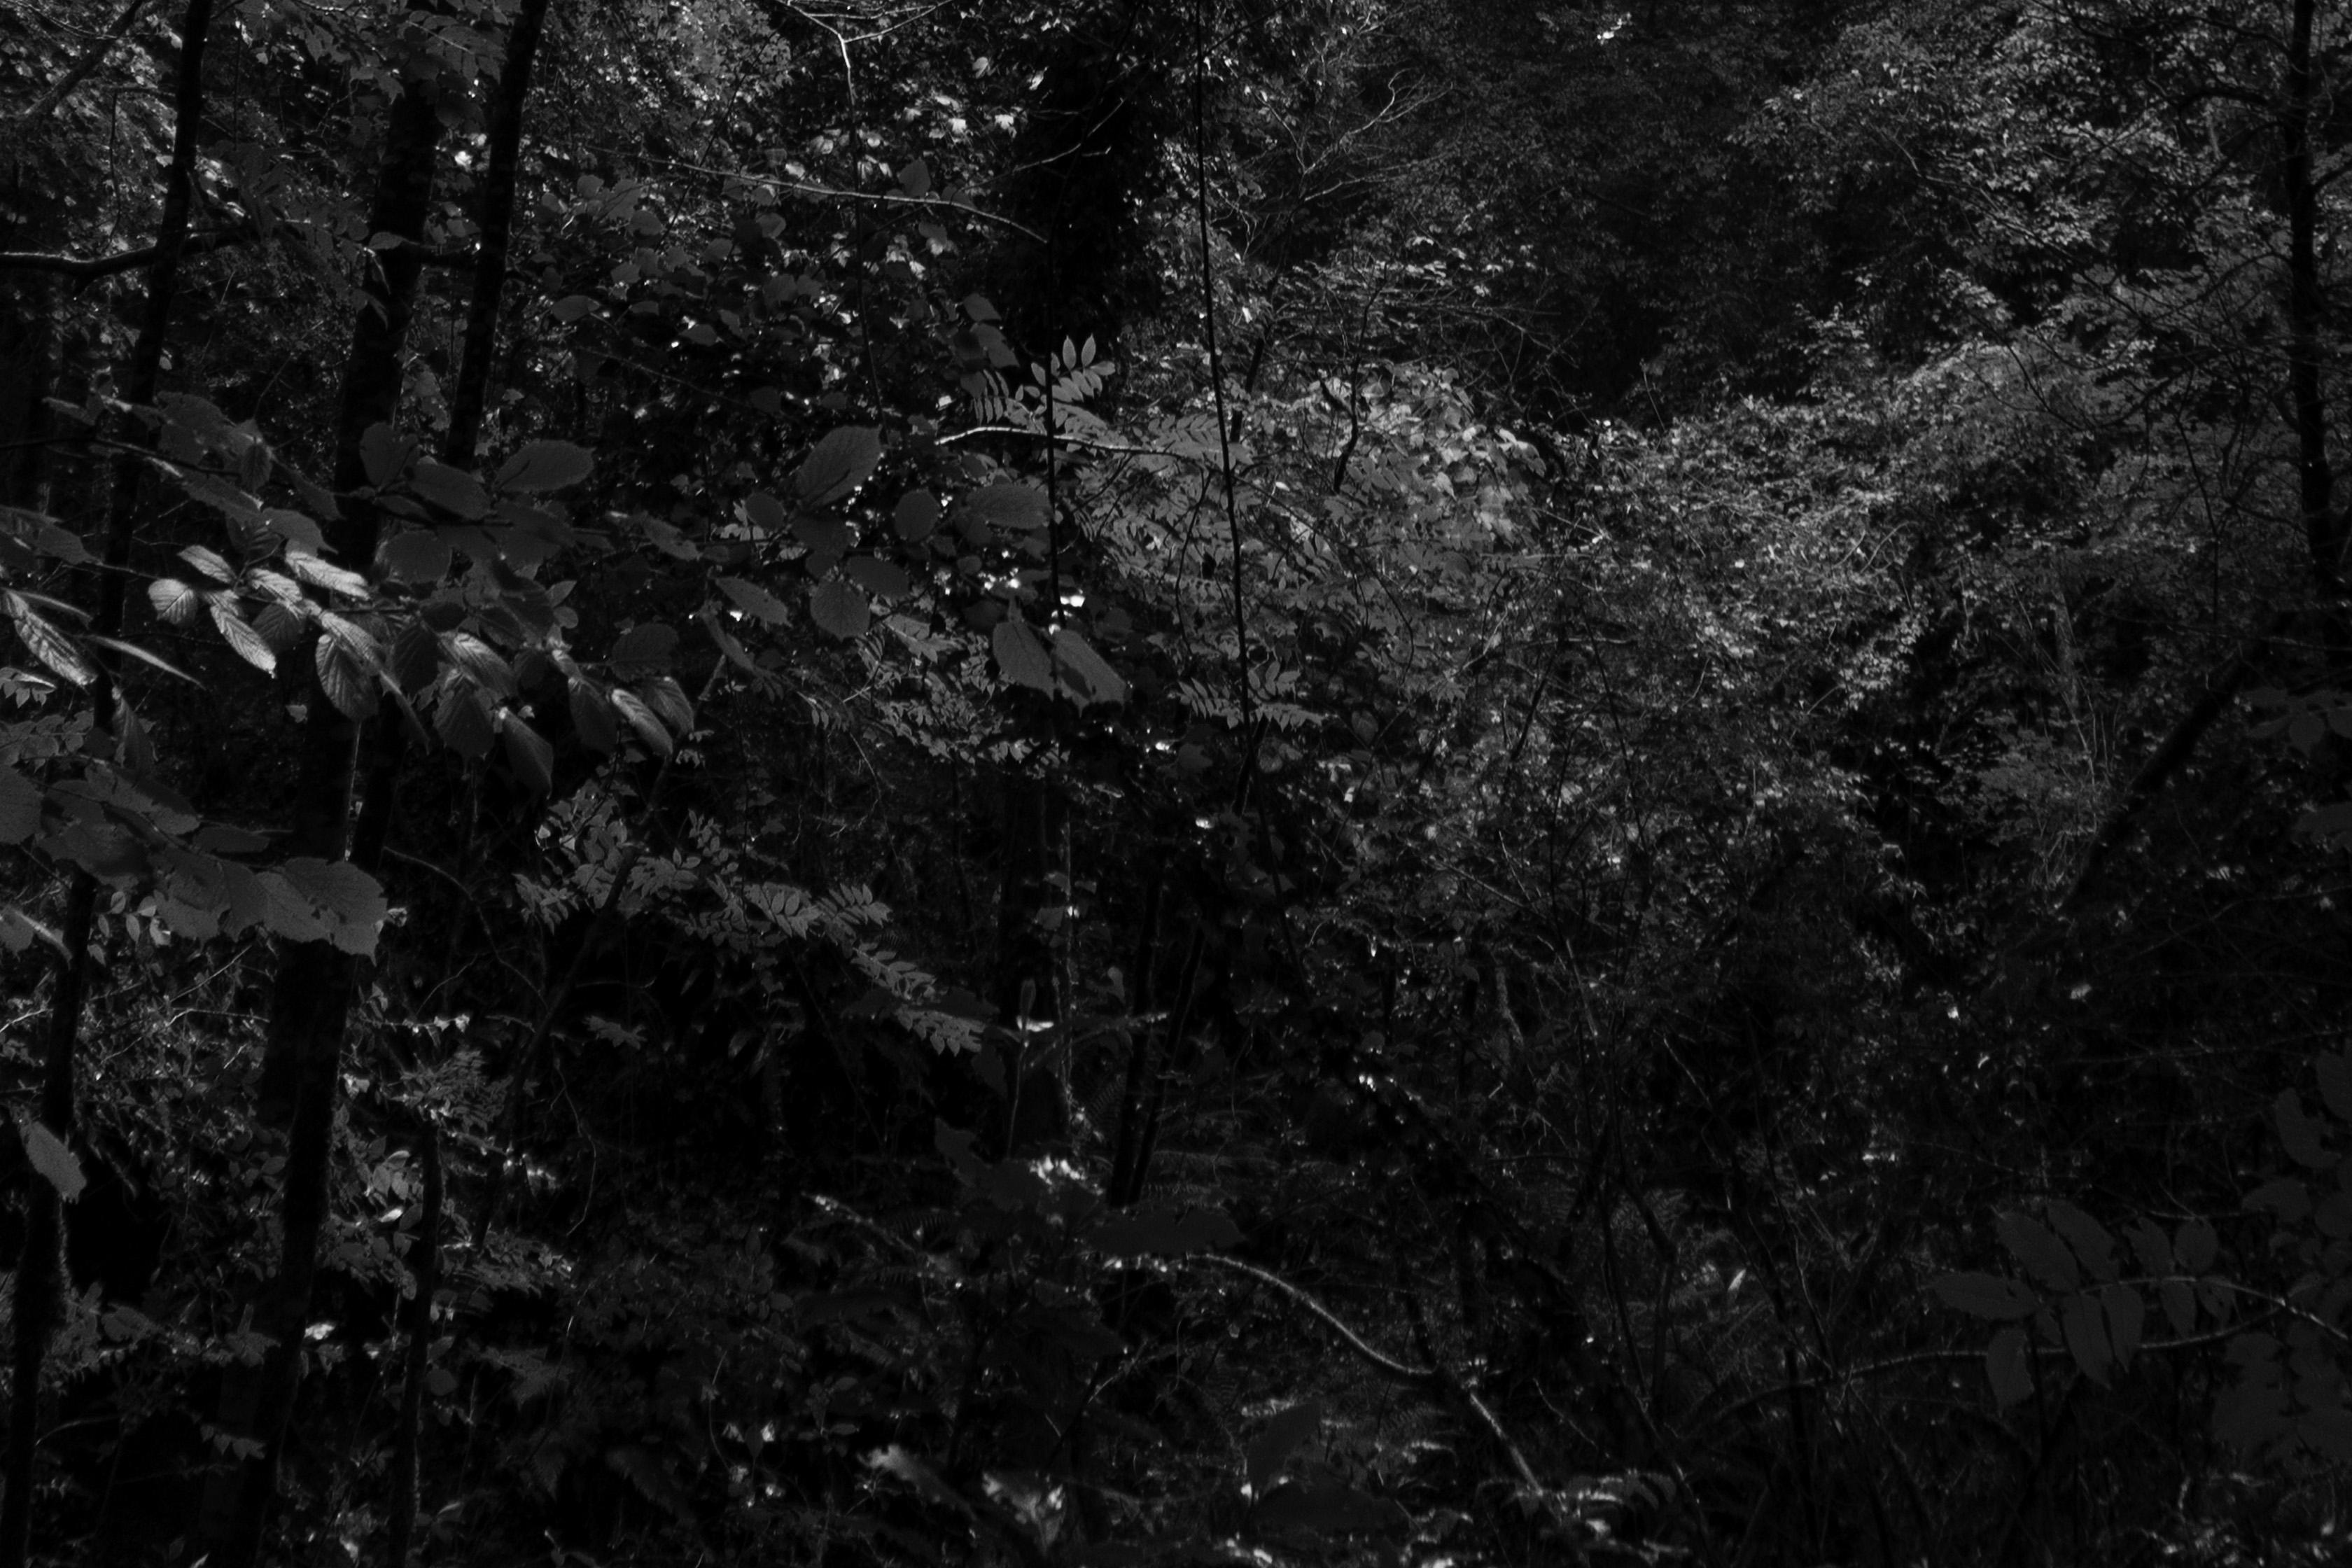 Late Afternoon Forest Light,  Black & White Landscape Limited Giiclée Print  - Realist Photograph by Kind of Cyan